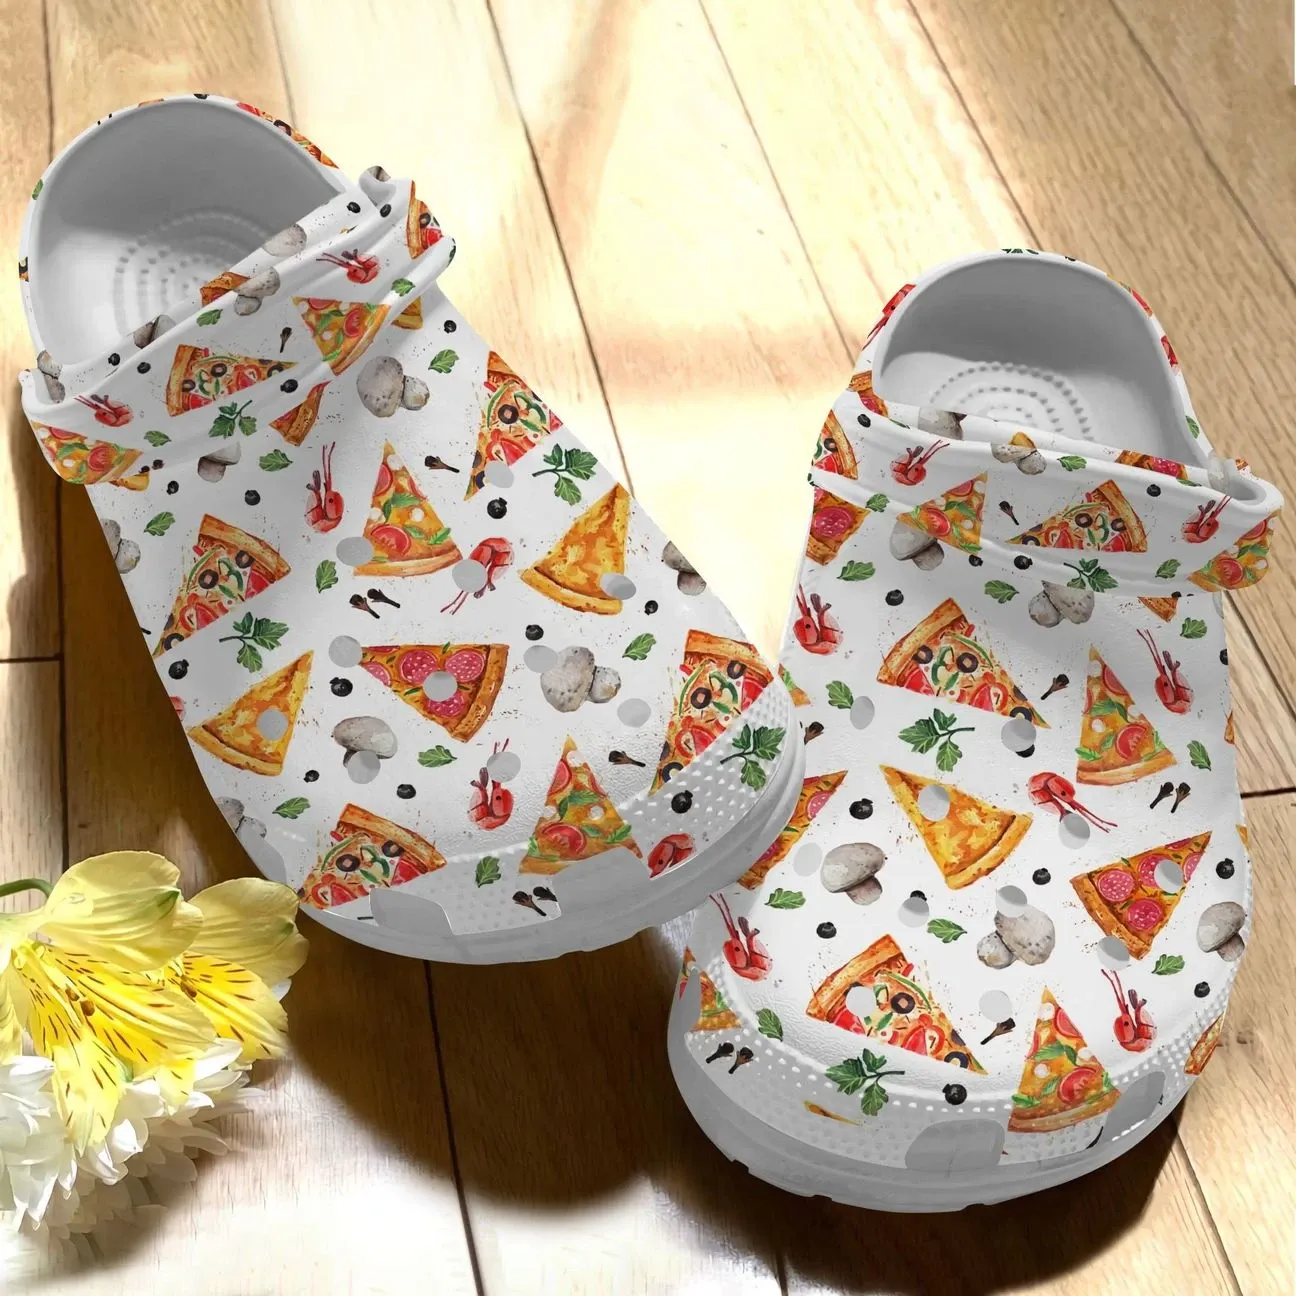 Pizza Personalize Clog Custom Crocs Fashionstyle Comfortable For Women Men Kid Print 3D Whitesole Pizza Slices